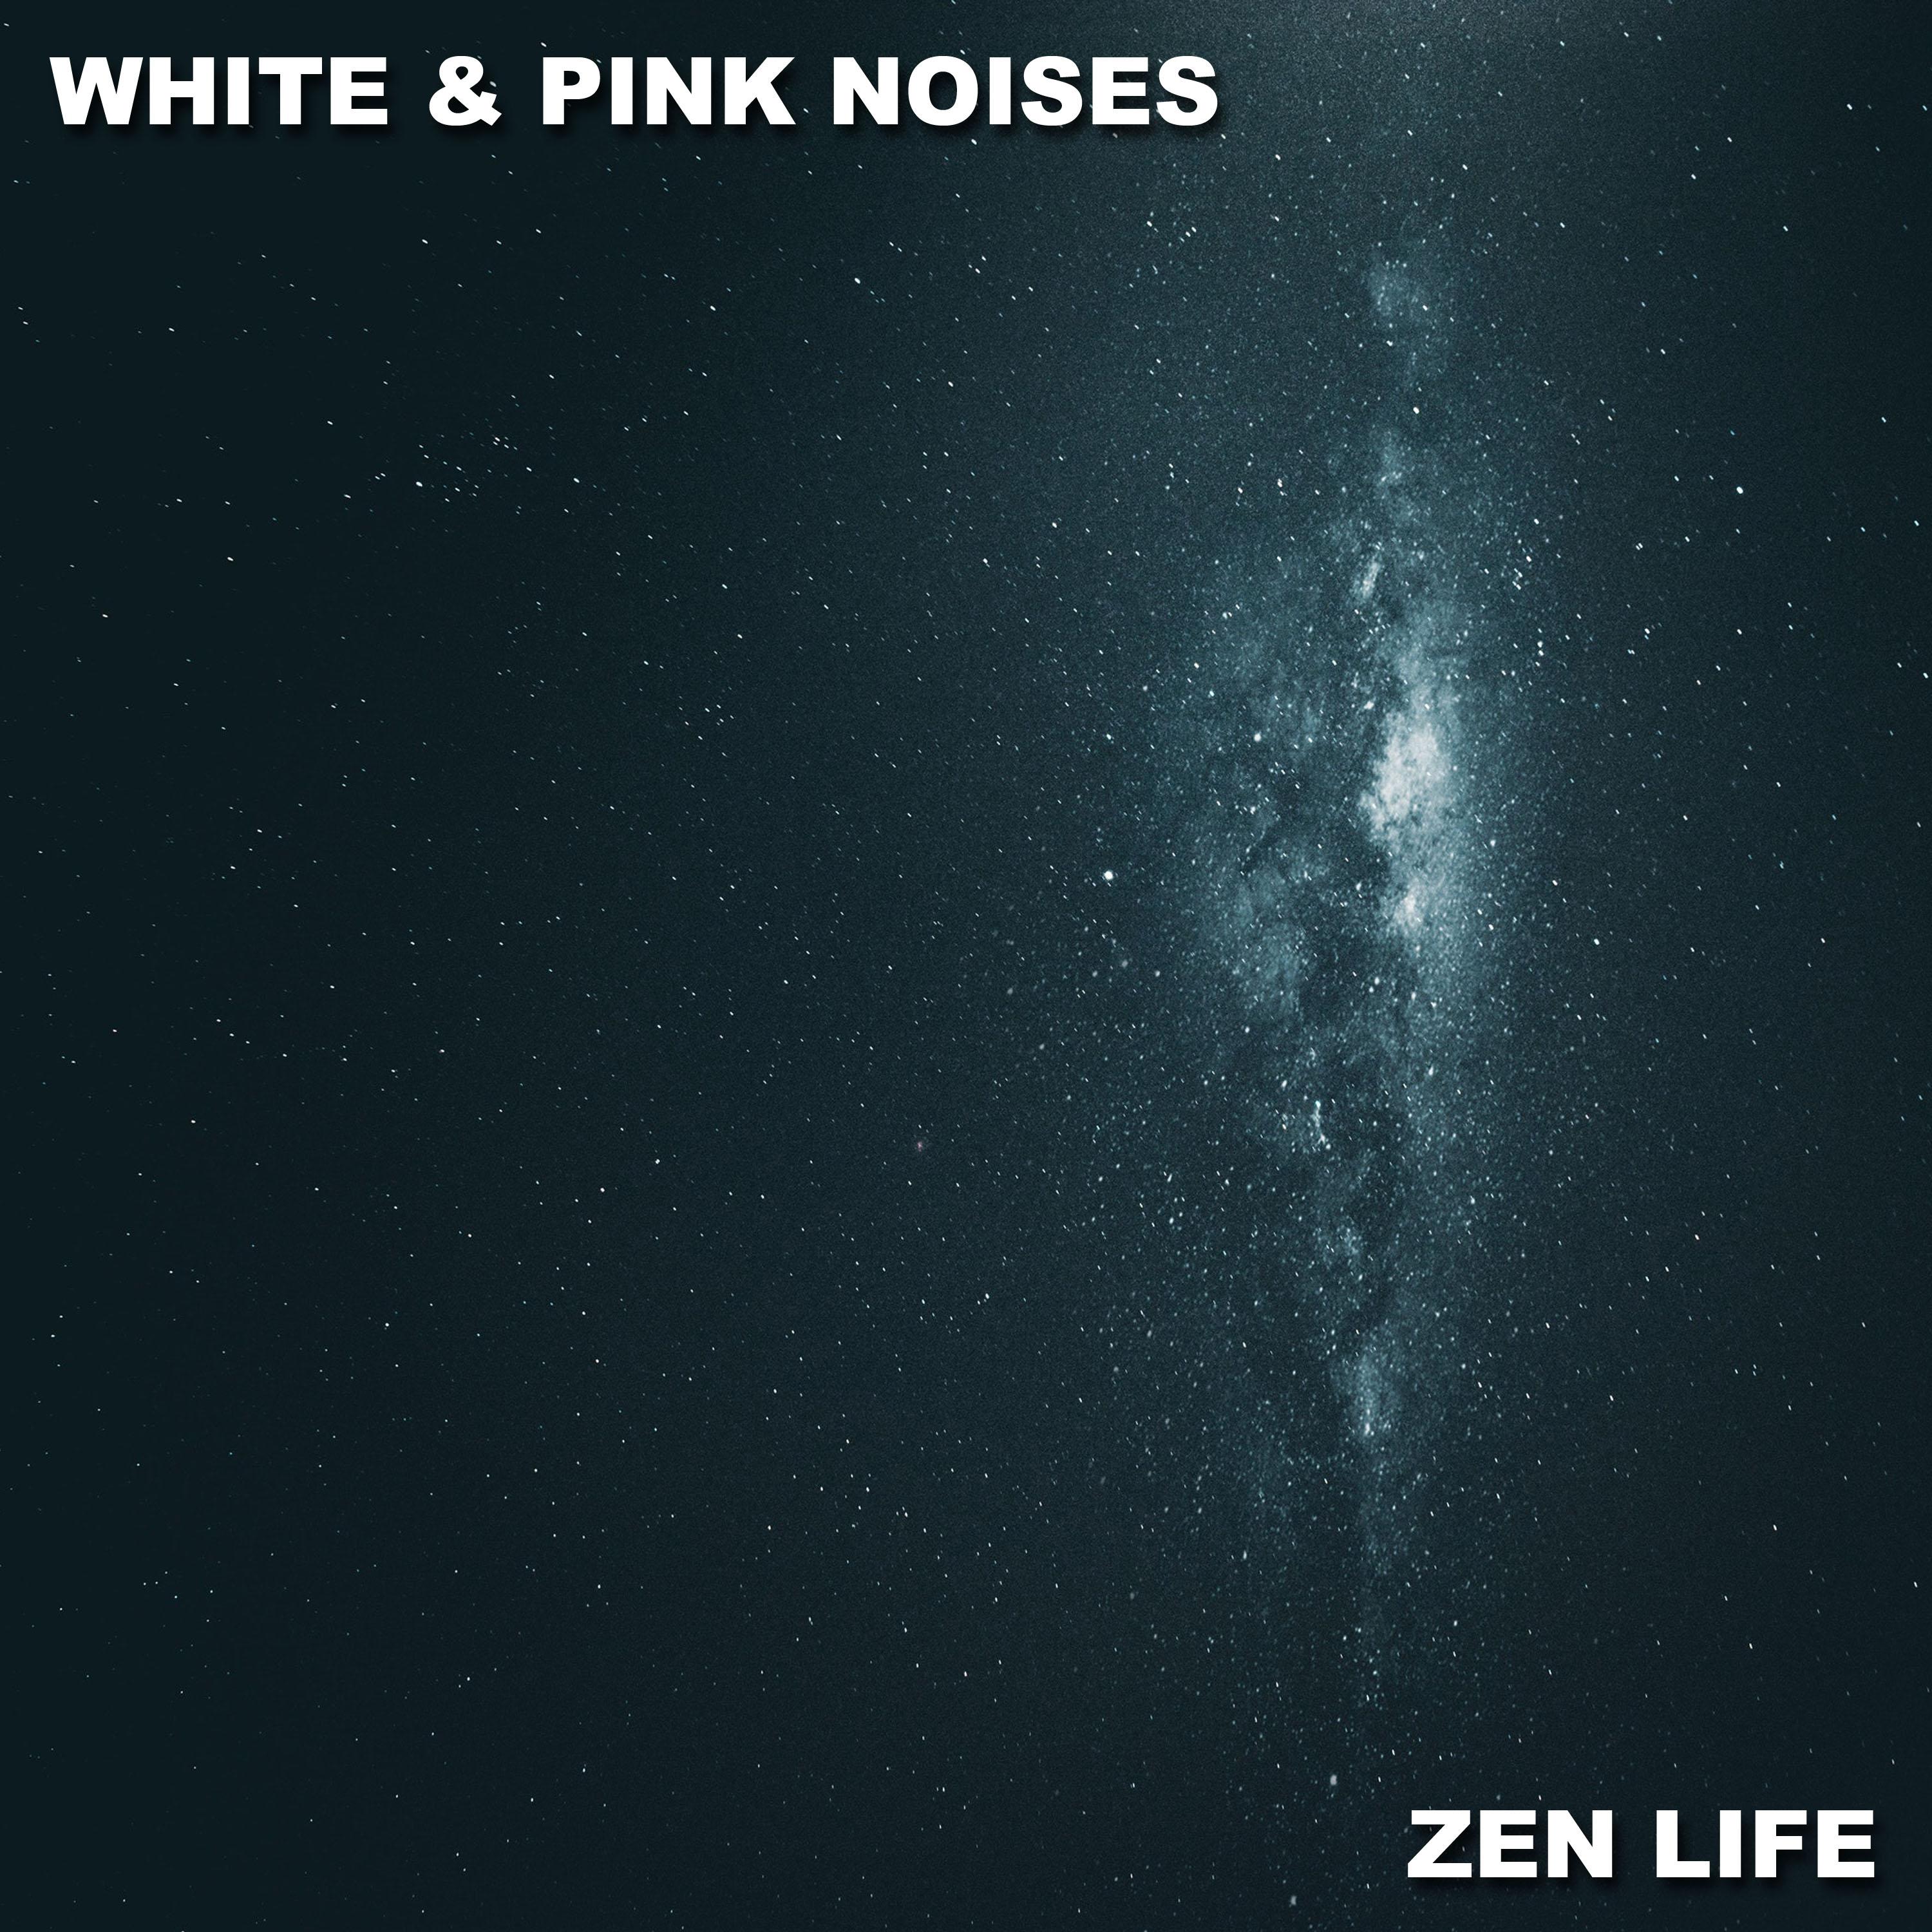 14 White & Pink Noises for a Zen Life